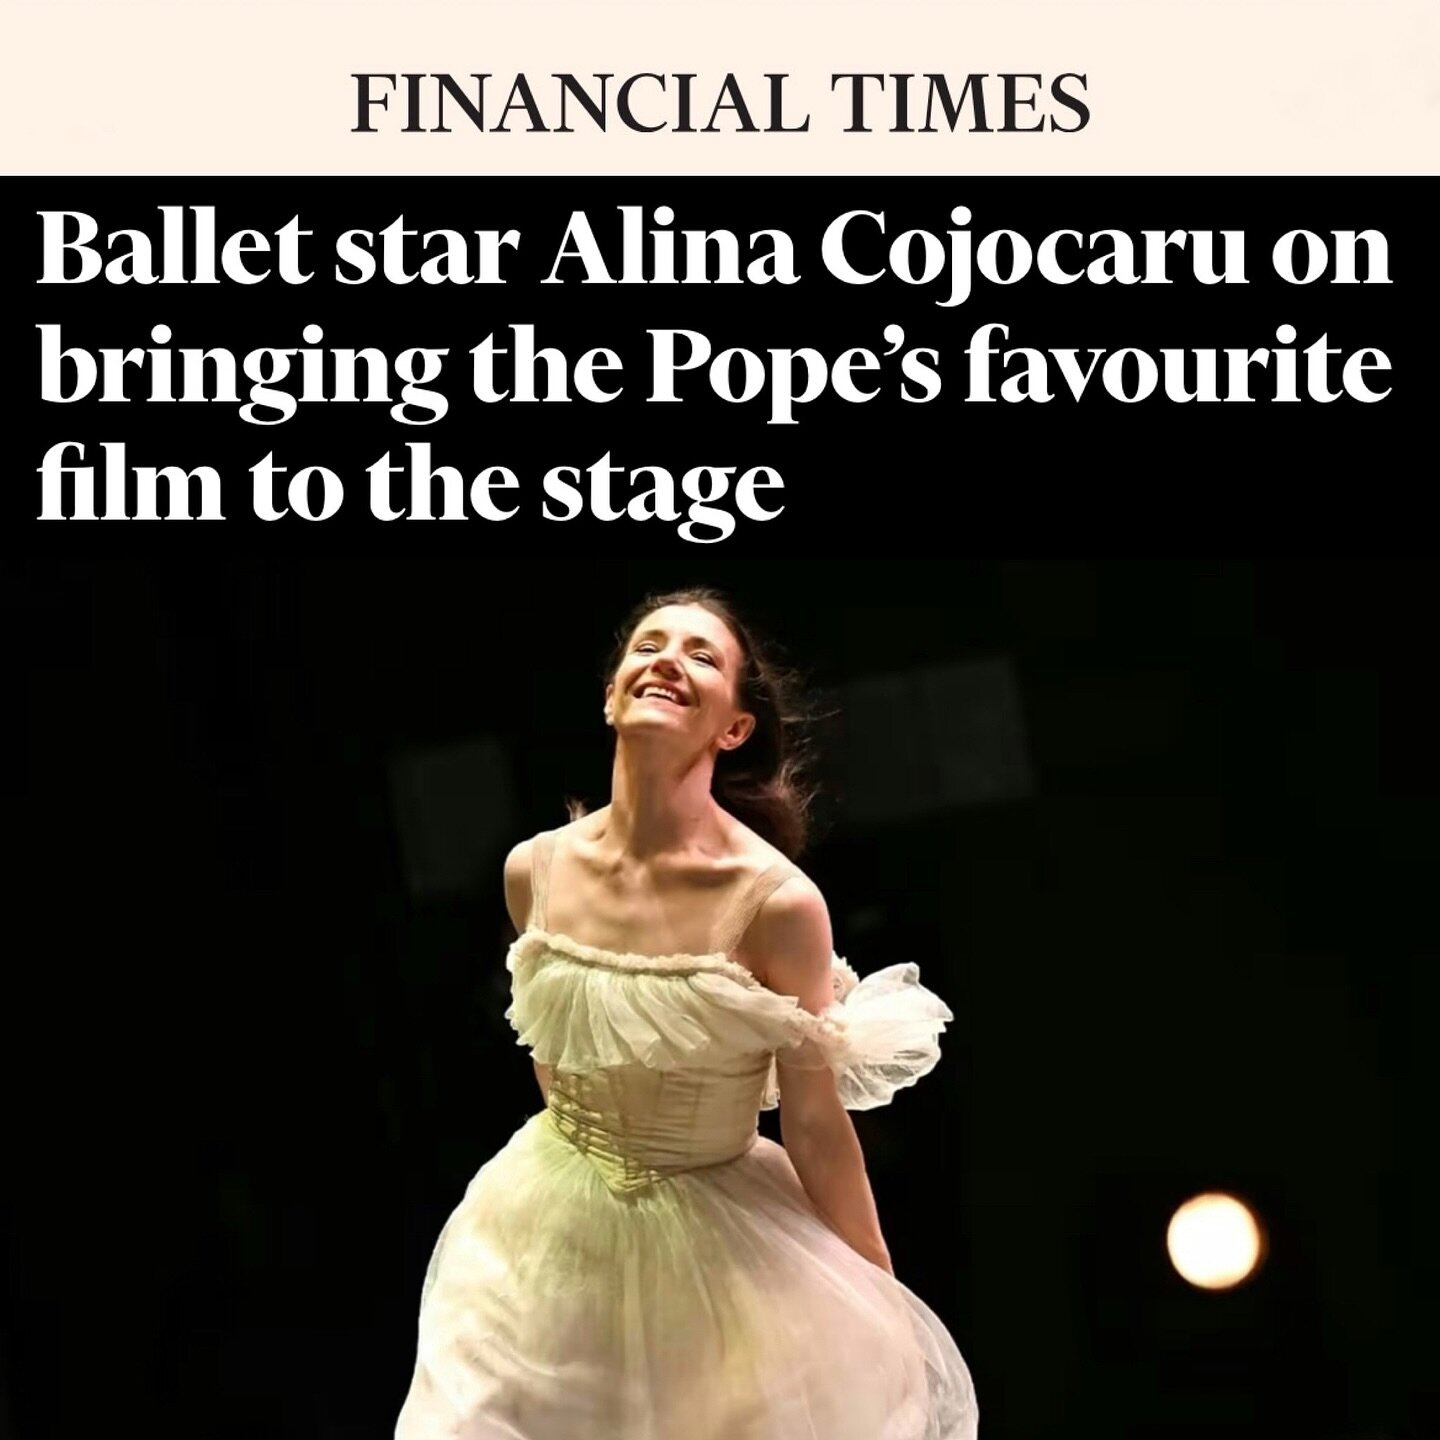 Thanks to the @financialtimes for this insightful interview with @dancingalinaofficial about bringing La Strada to the stage. Opening at @sadlers_wells 25 - 28 January. 

#AlinaCojocaru #LaStrada #FreelancePR #DancePR